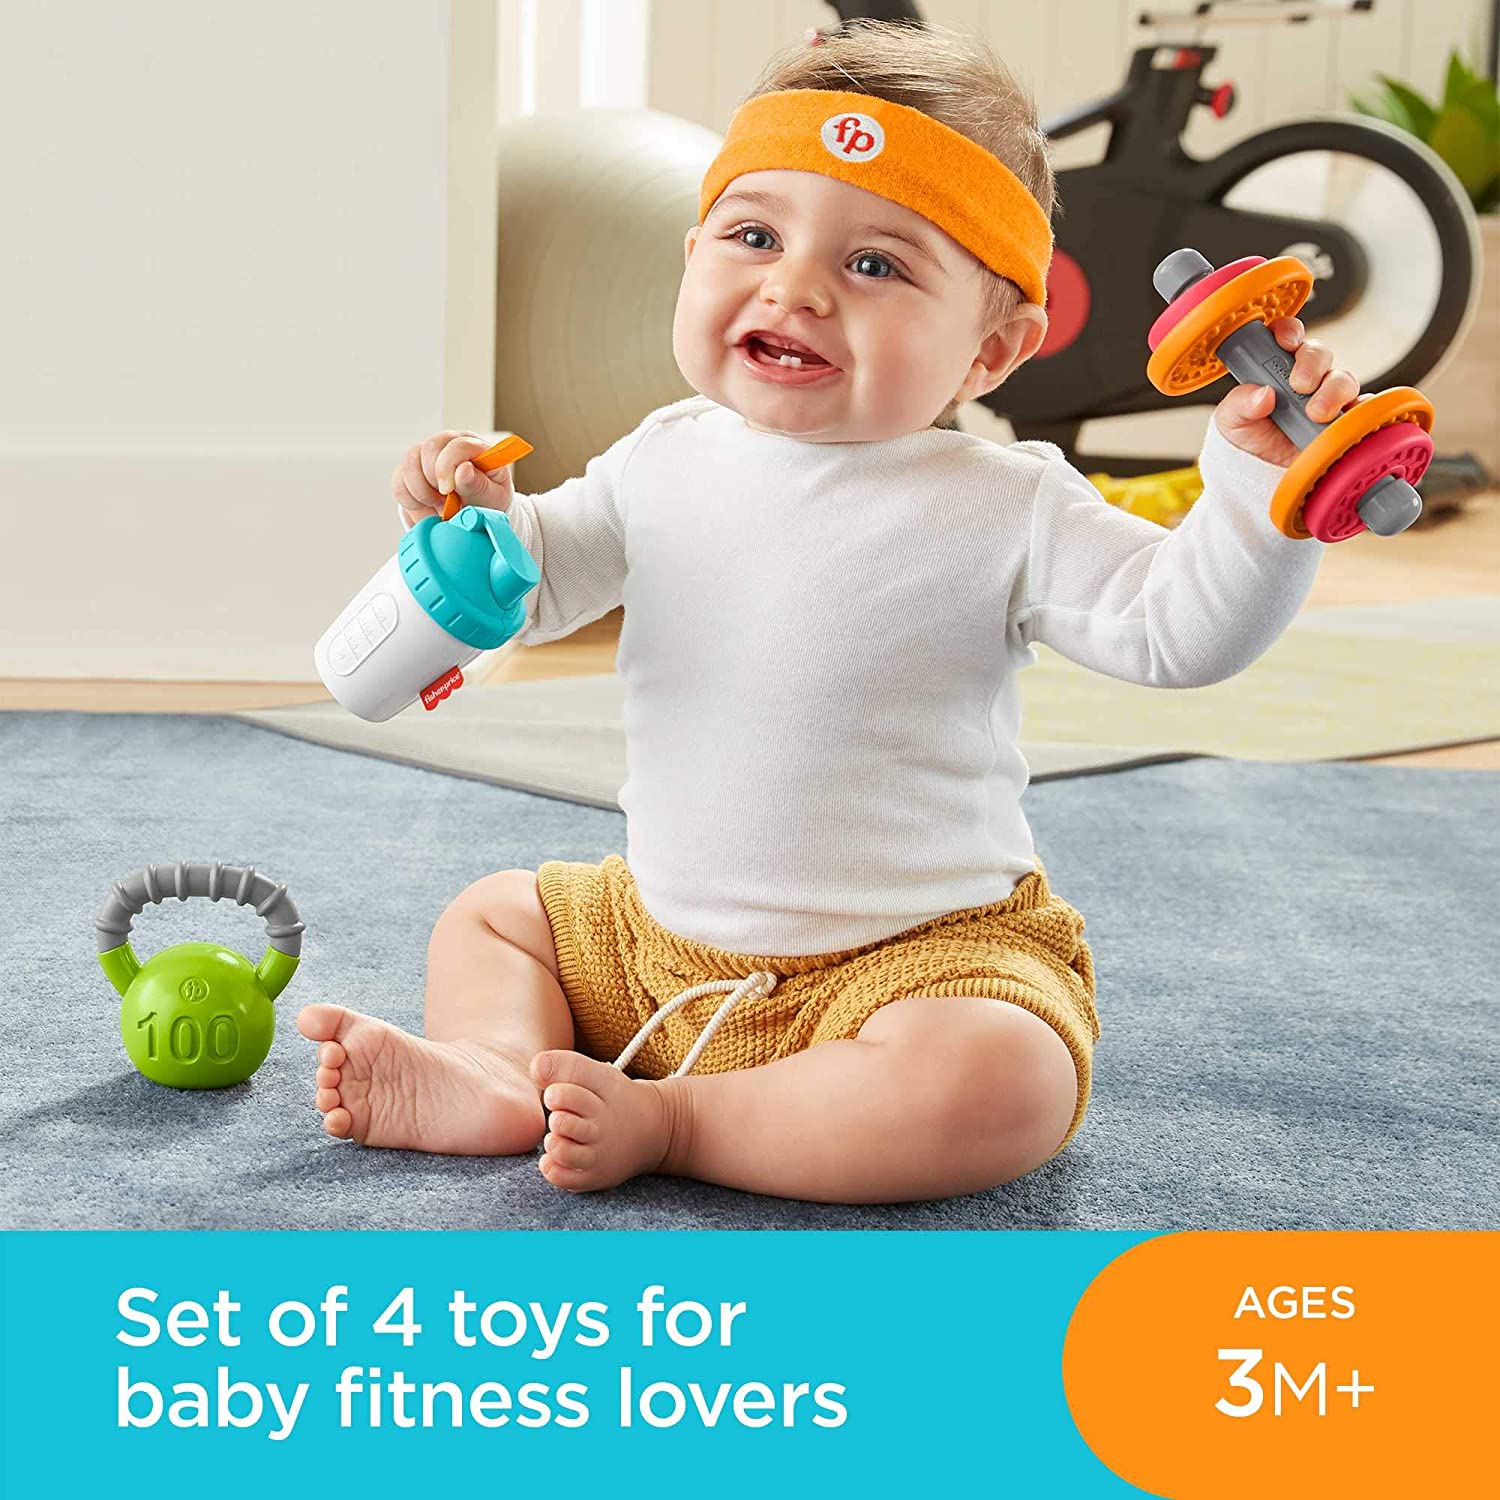 Fisher-Price Baby Biceps Gift Set - For baby fitness lovers ages 3 months and older